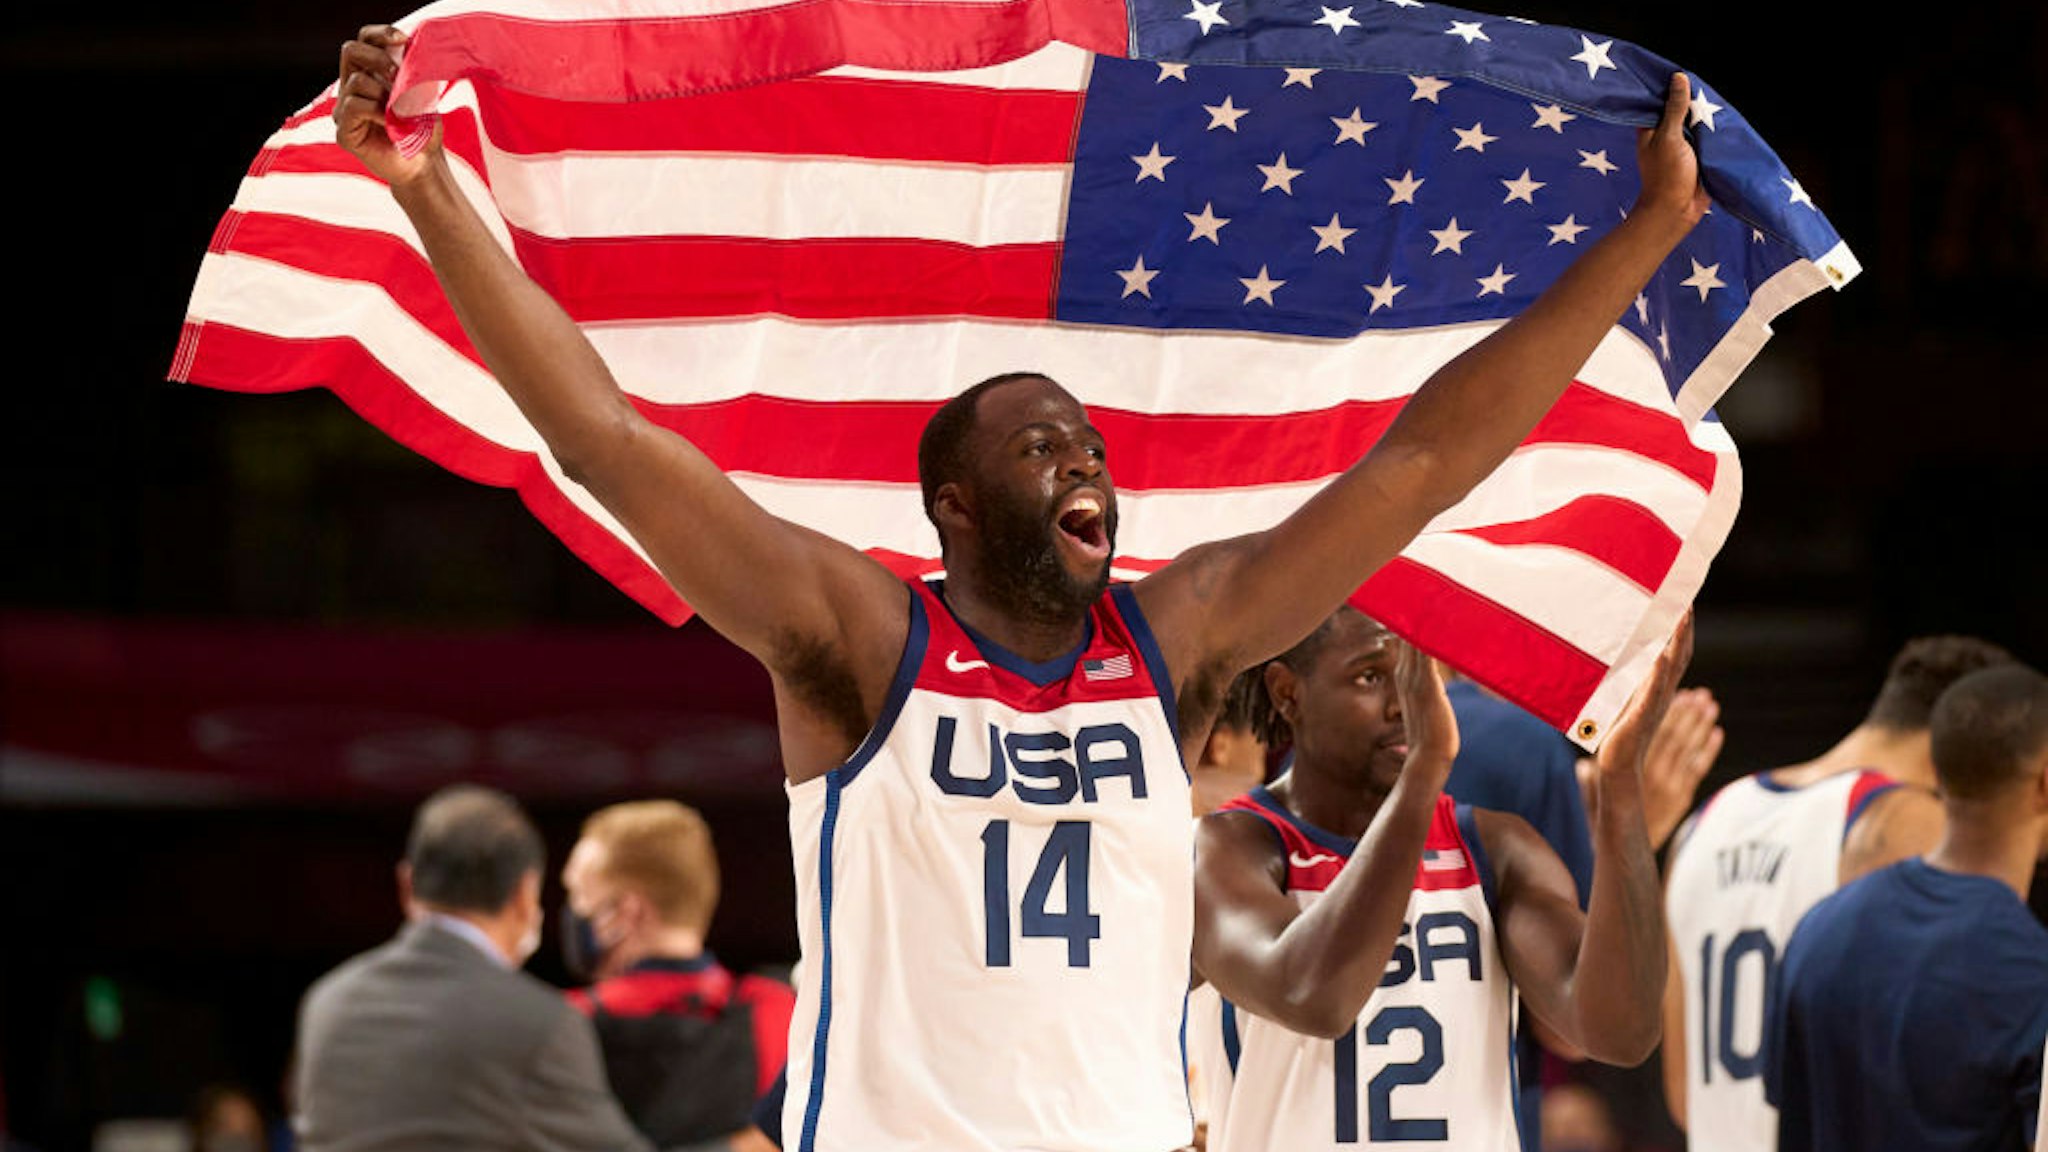 Basketball: 2020 Summer Olympics: USA Draymond Green (14) victorious holding up USA flag after Men's Final vs France at Saitama Super Arena. USA wins gold. Tokyo, Japan 8/7/2021 CREDIT: Erick W. Rasco/Sports Illustrated via Getty Images) (Set Number: X163748 TK1)